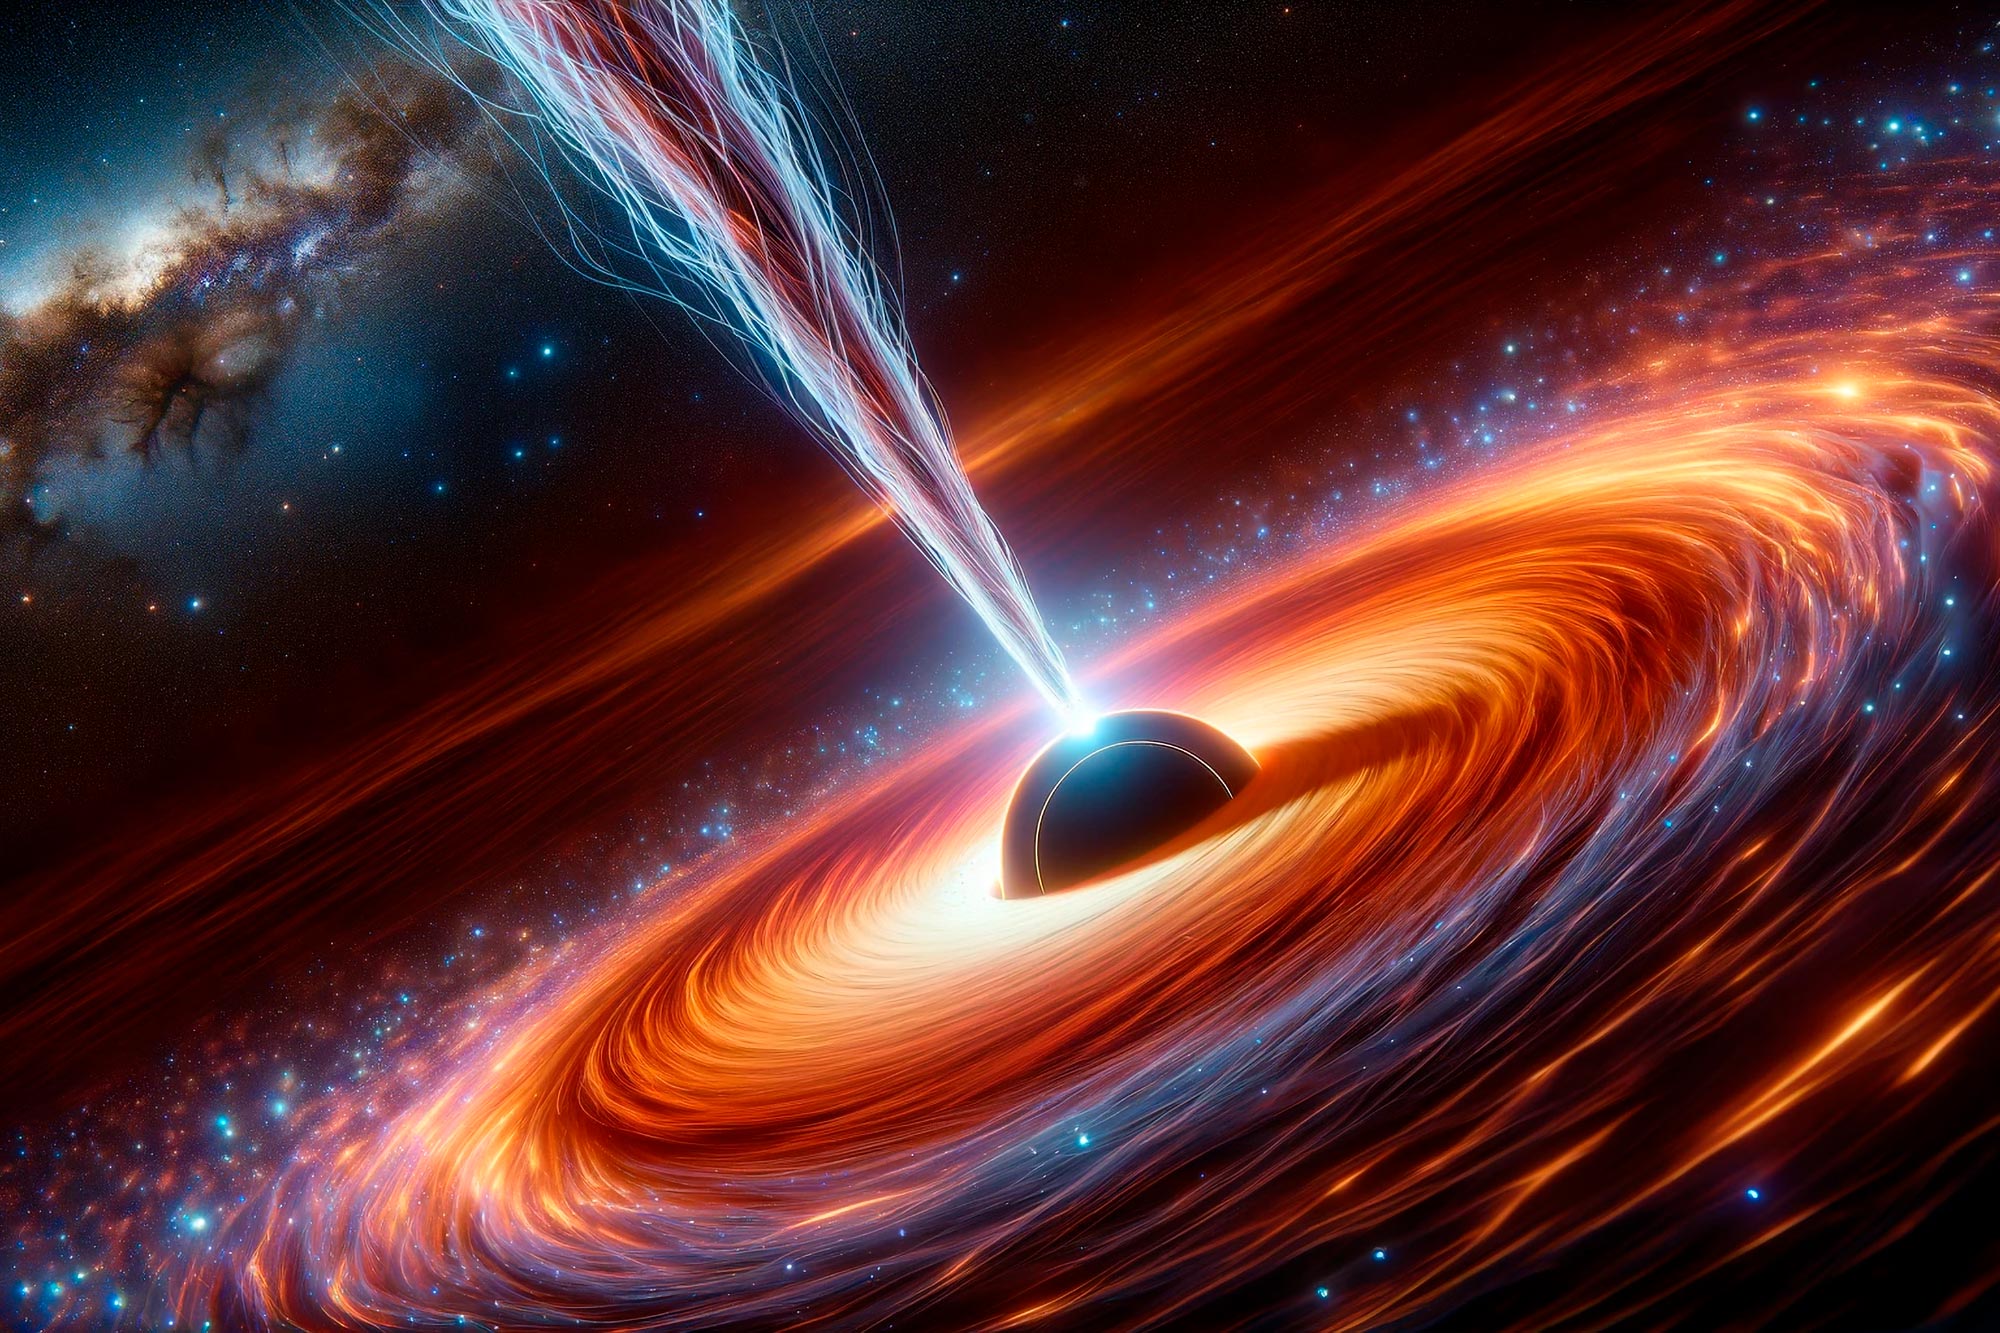 Princeton astrophysicists unravel the mystery of black hole jets and galactic ‘light sabers’